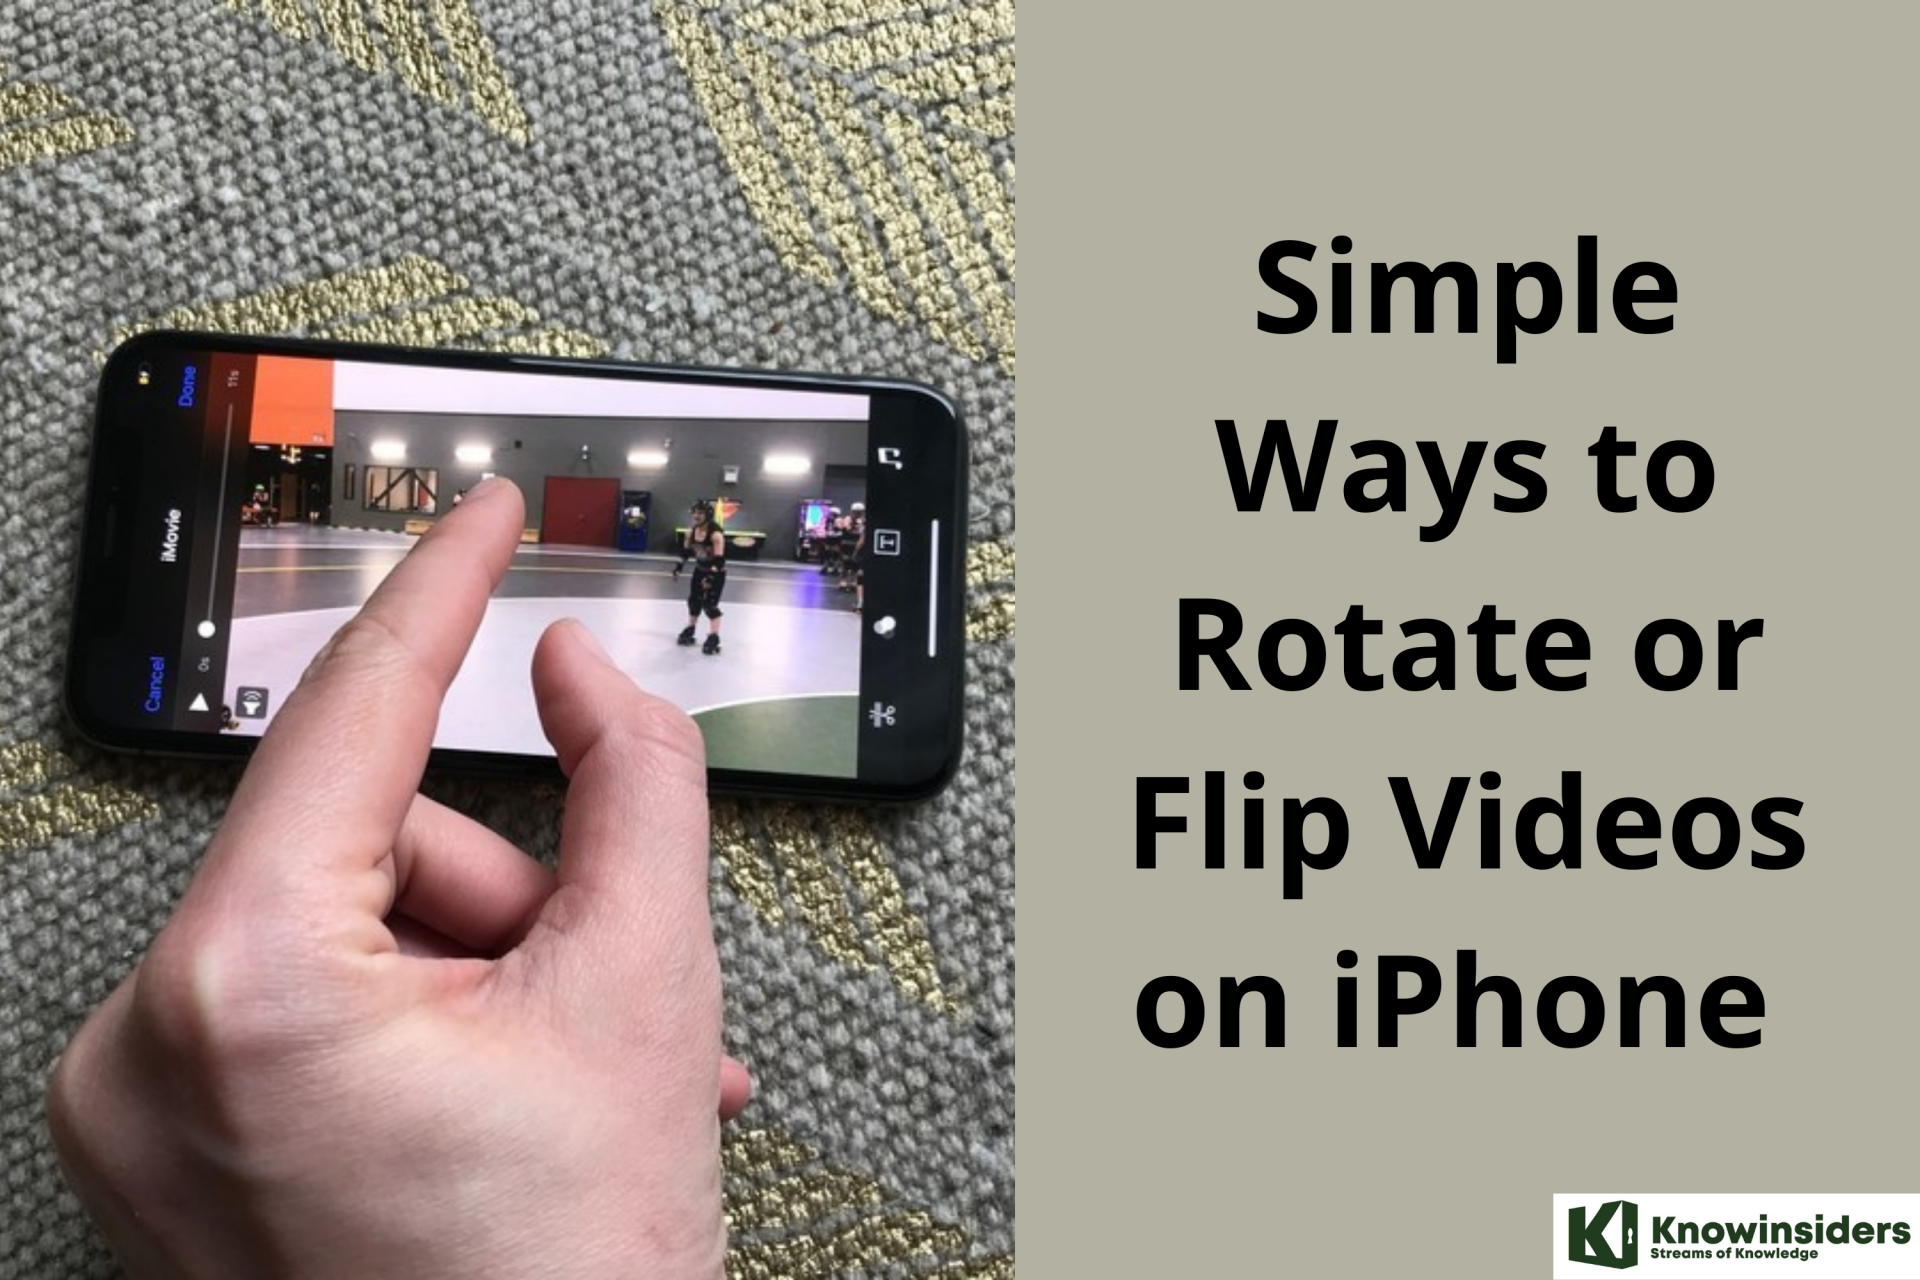 Simple Ways to Rotate or Flip Videos on iPhone - Complete Guides